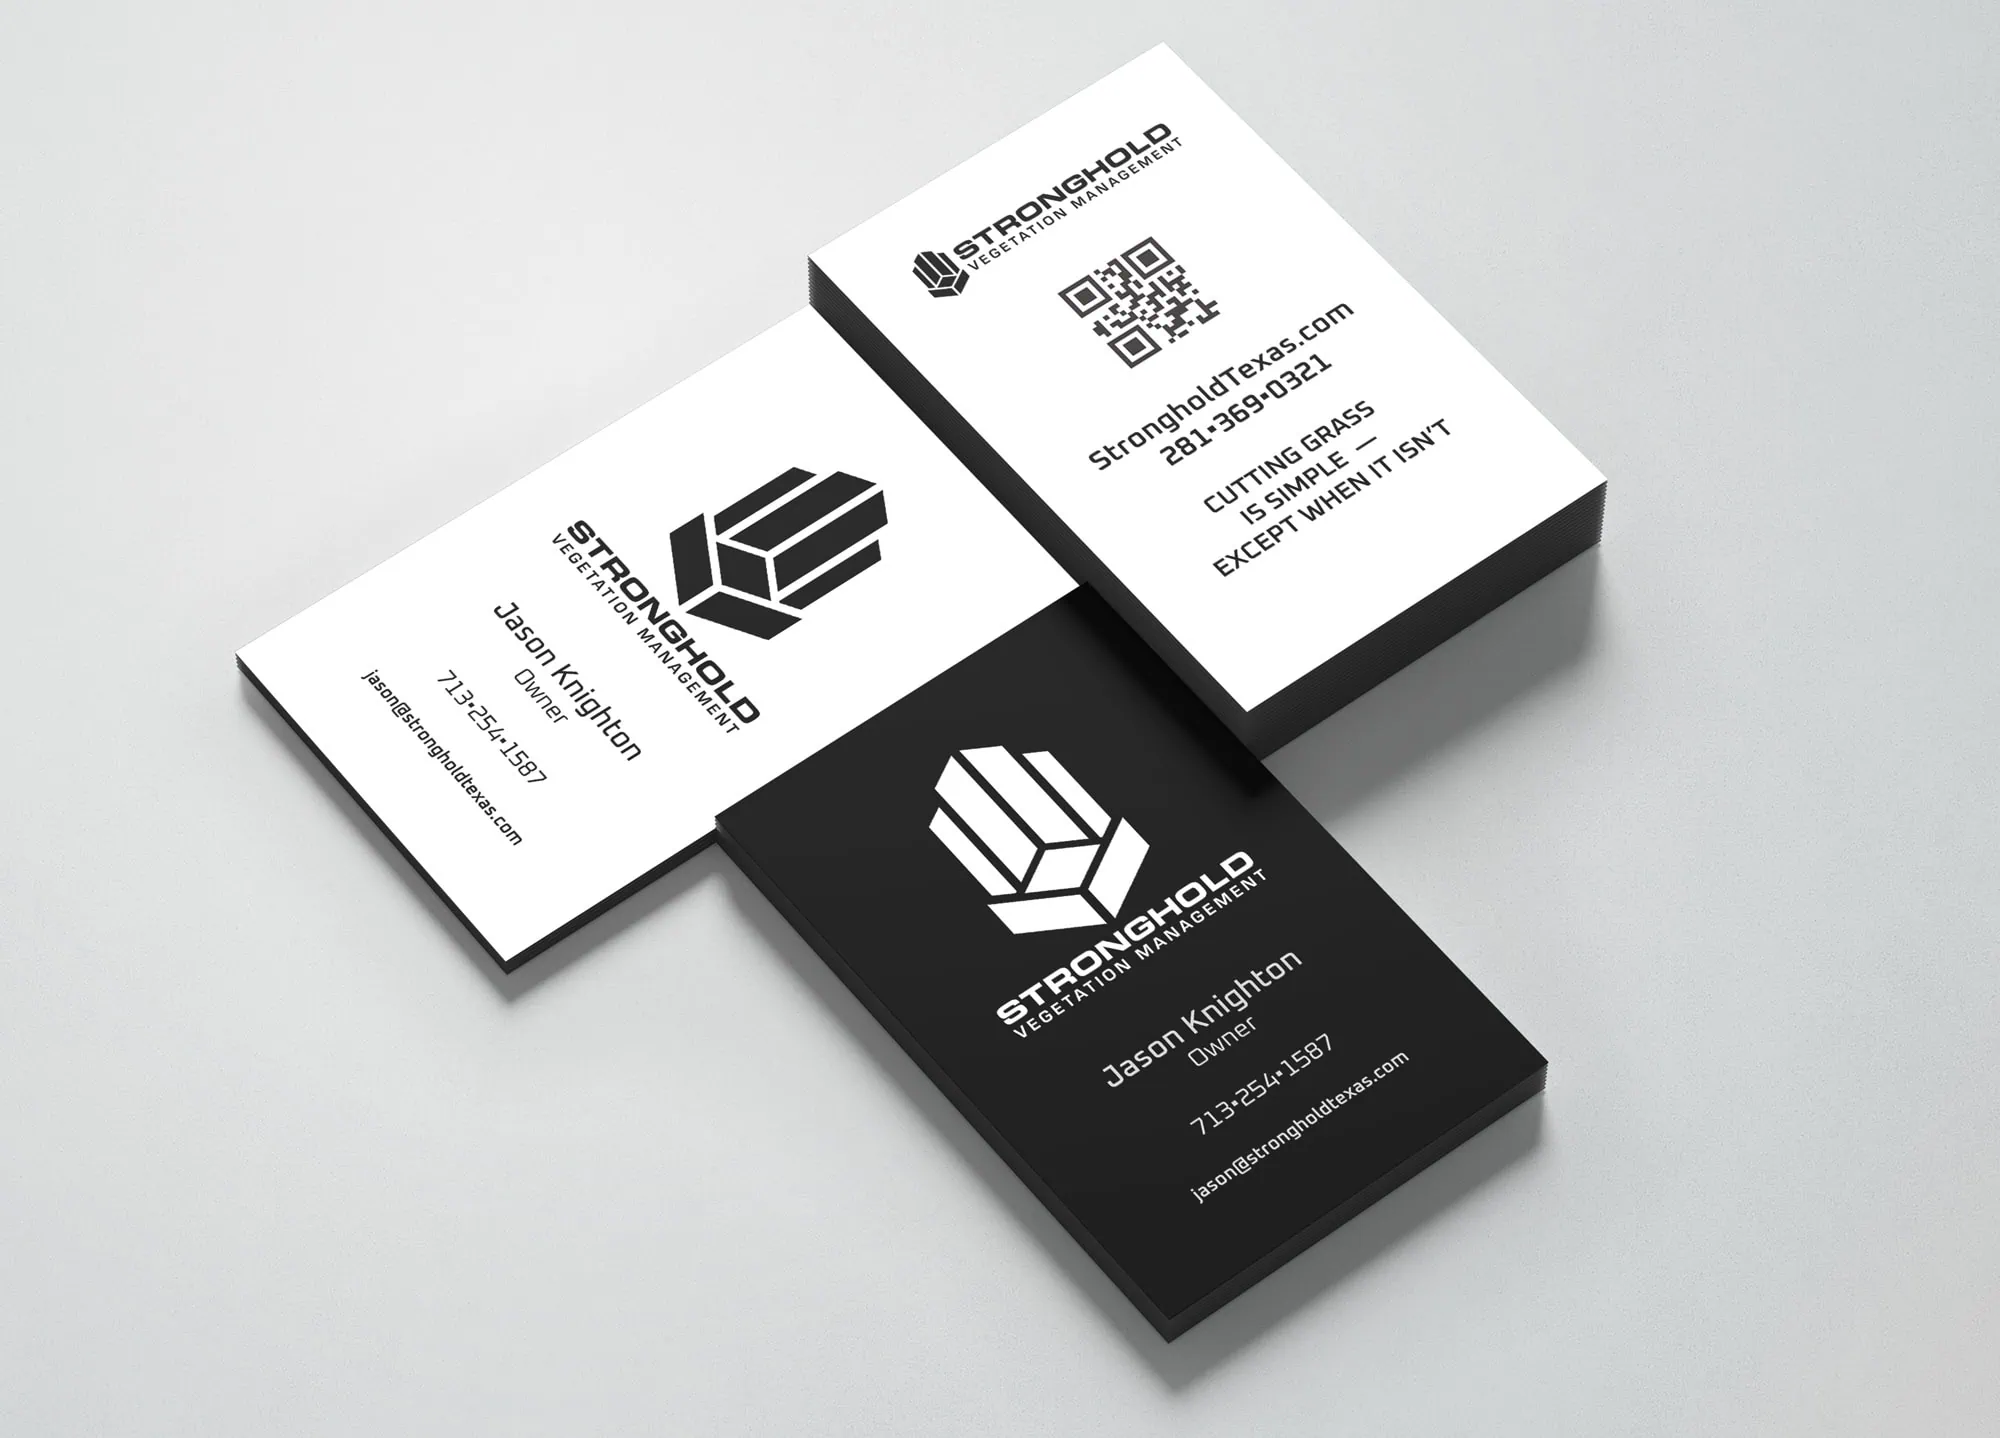 The image shows a collection of business card print for Stronghold Vegetation Management. Two black cards display white text with contact details for Jason Knighton, providing a sense of stark professionalism. Two white cards feature a QR code along with other contact information and the company's logo, which is also on the black cards. - Market Design Team: Define. Structure. Expand.